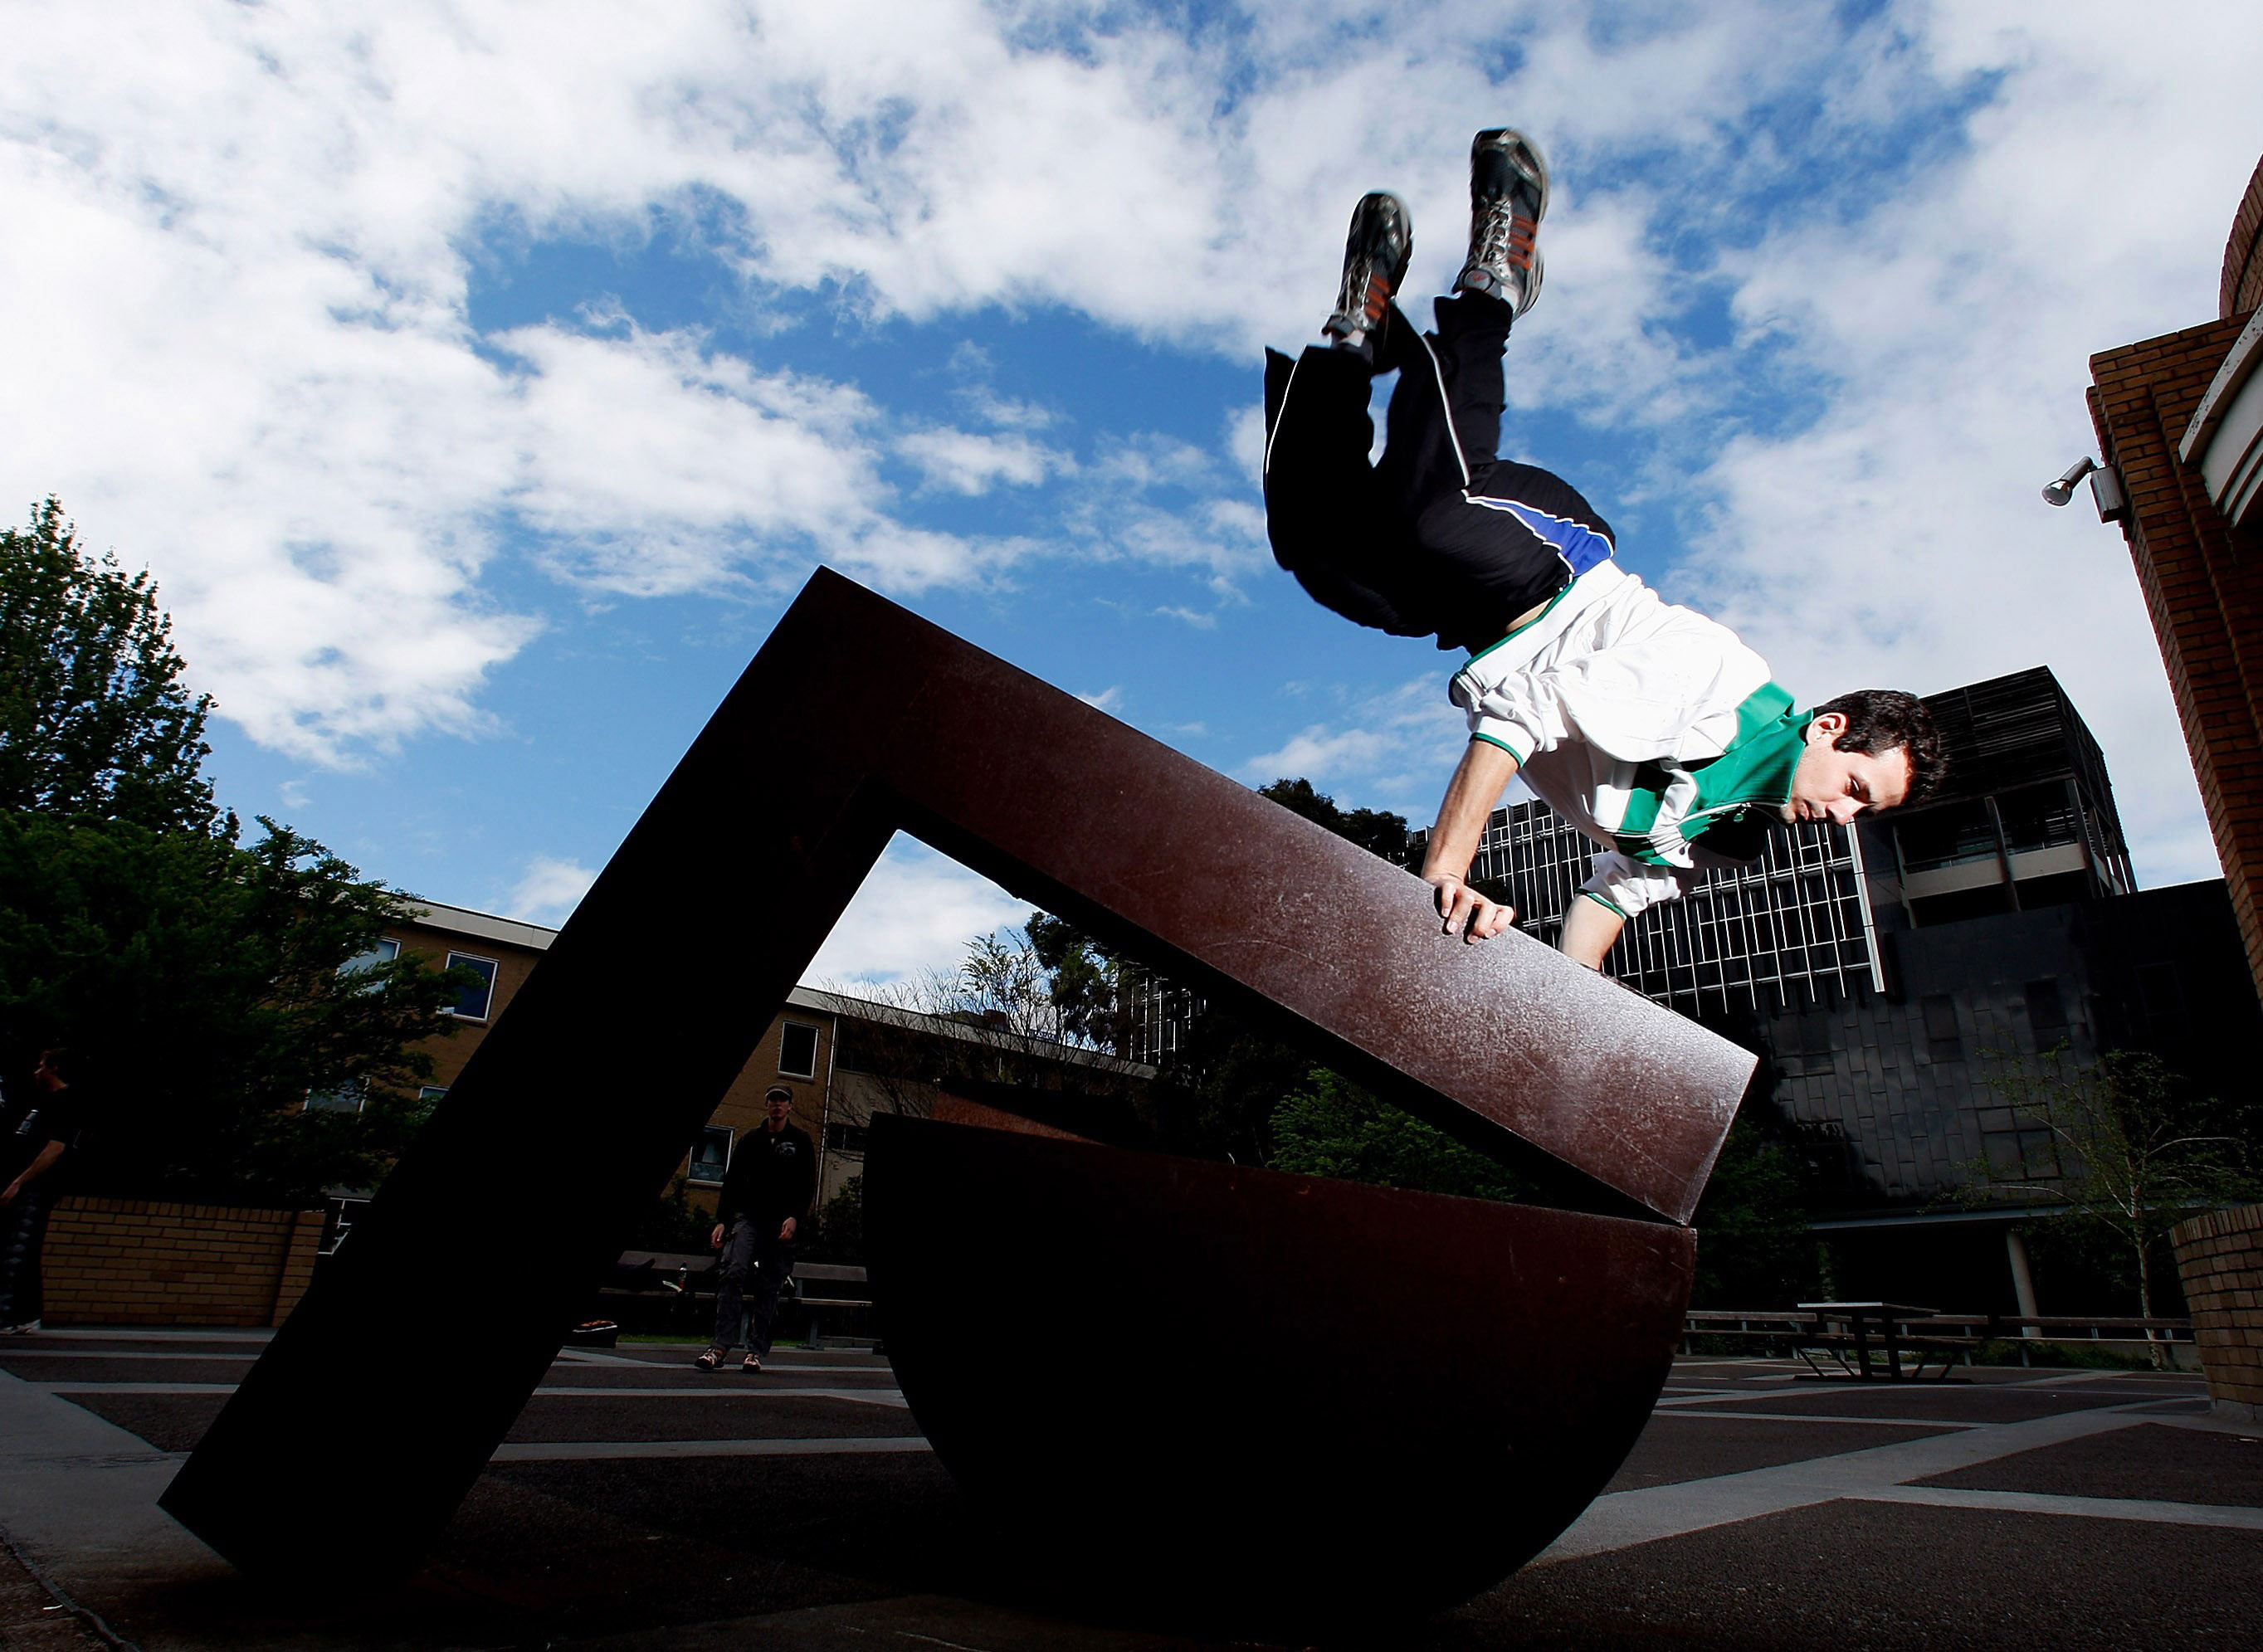 Parkour: Artistry over efficiency and speed, Urban freerunner. 2730x2000 HD Wallpaper.